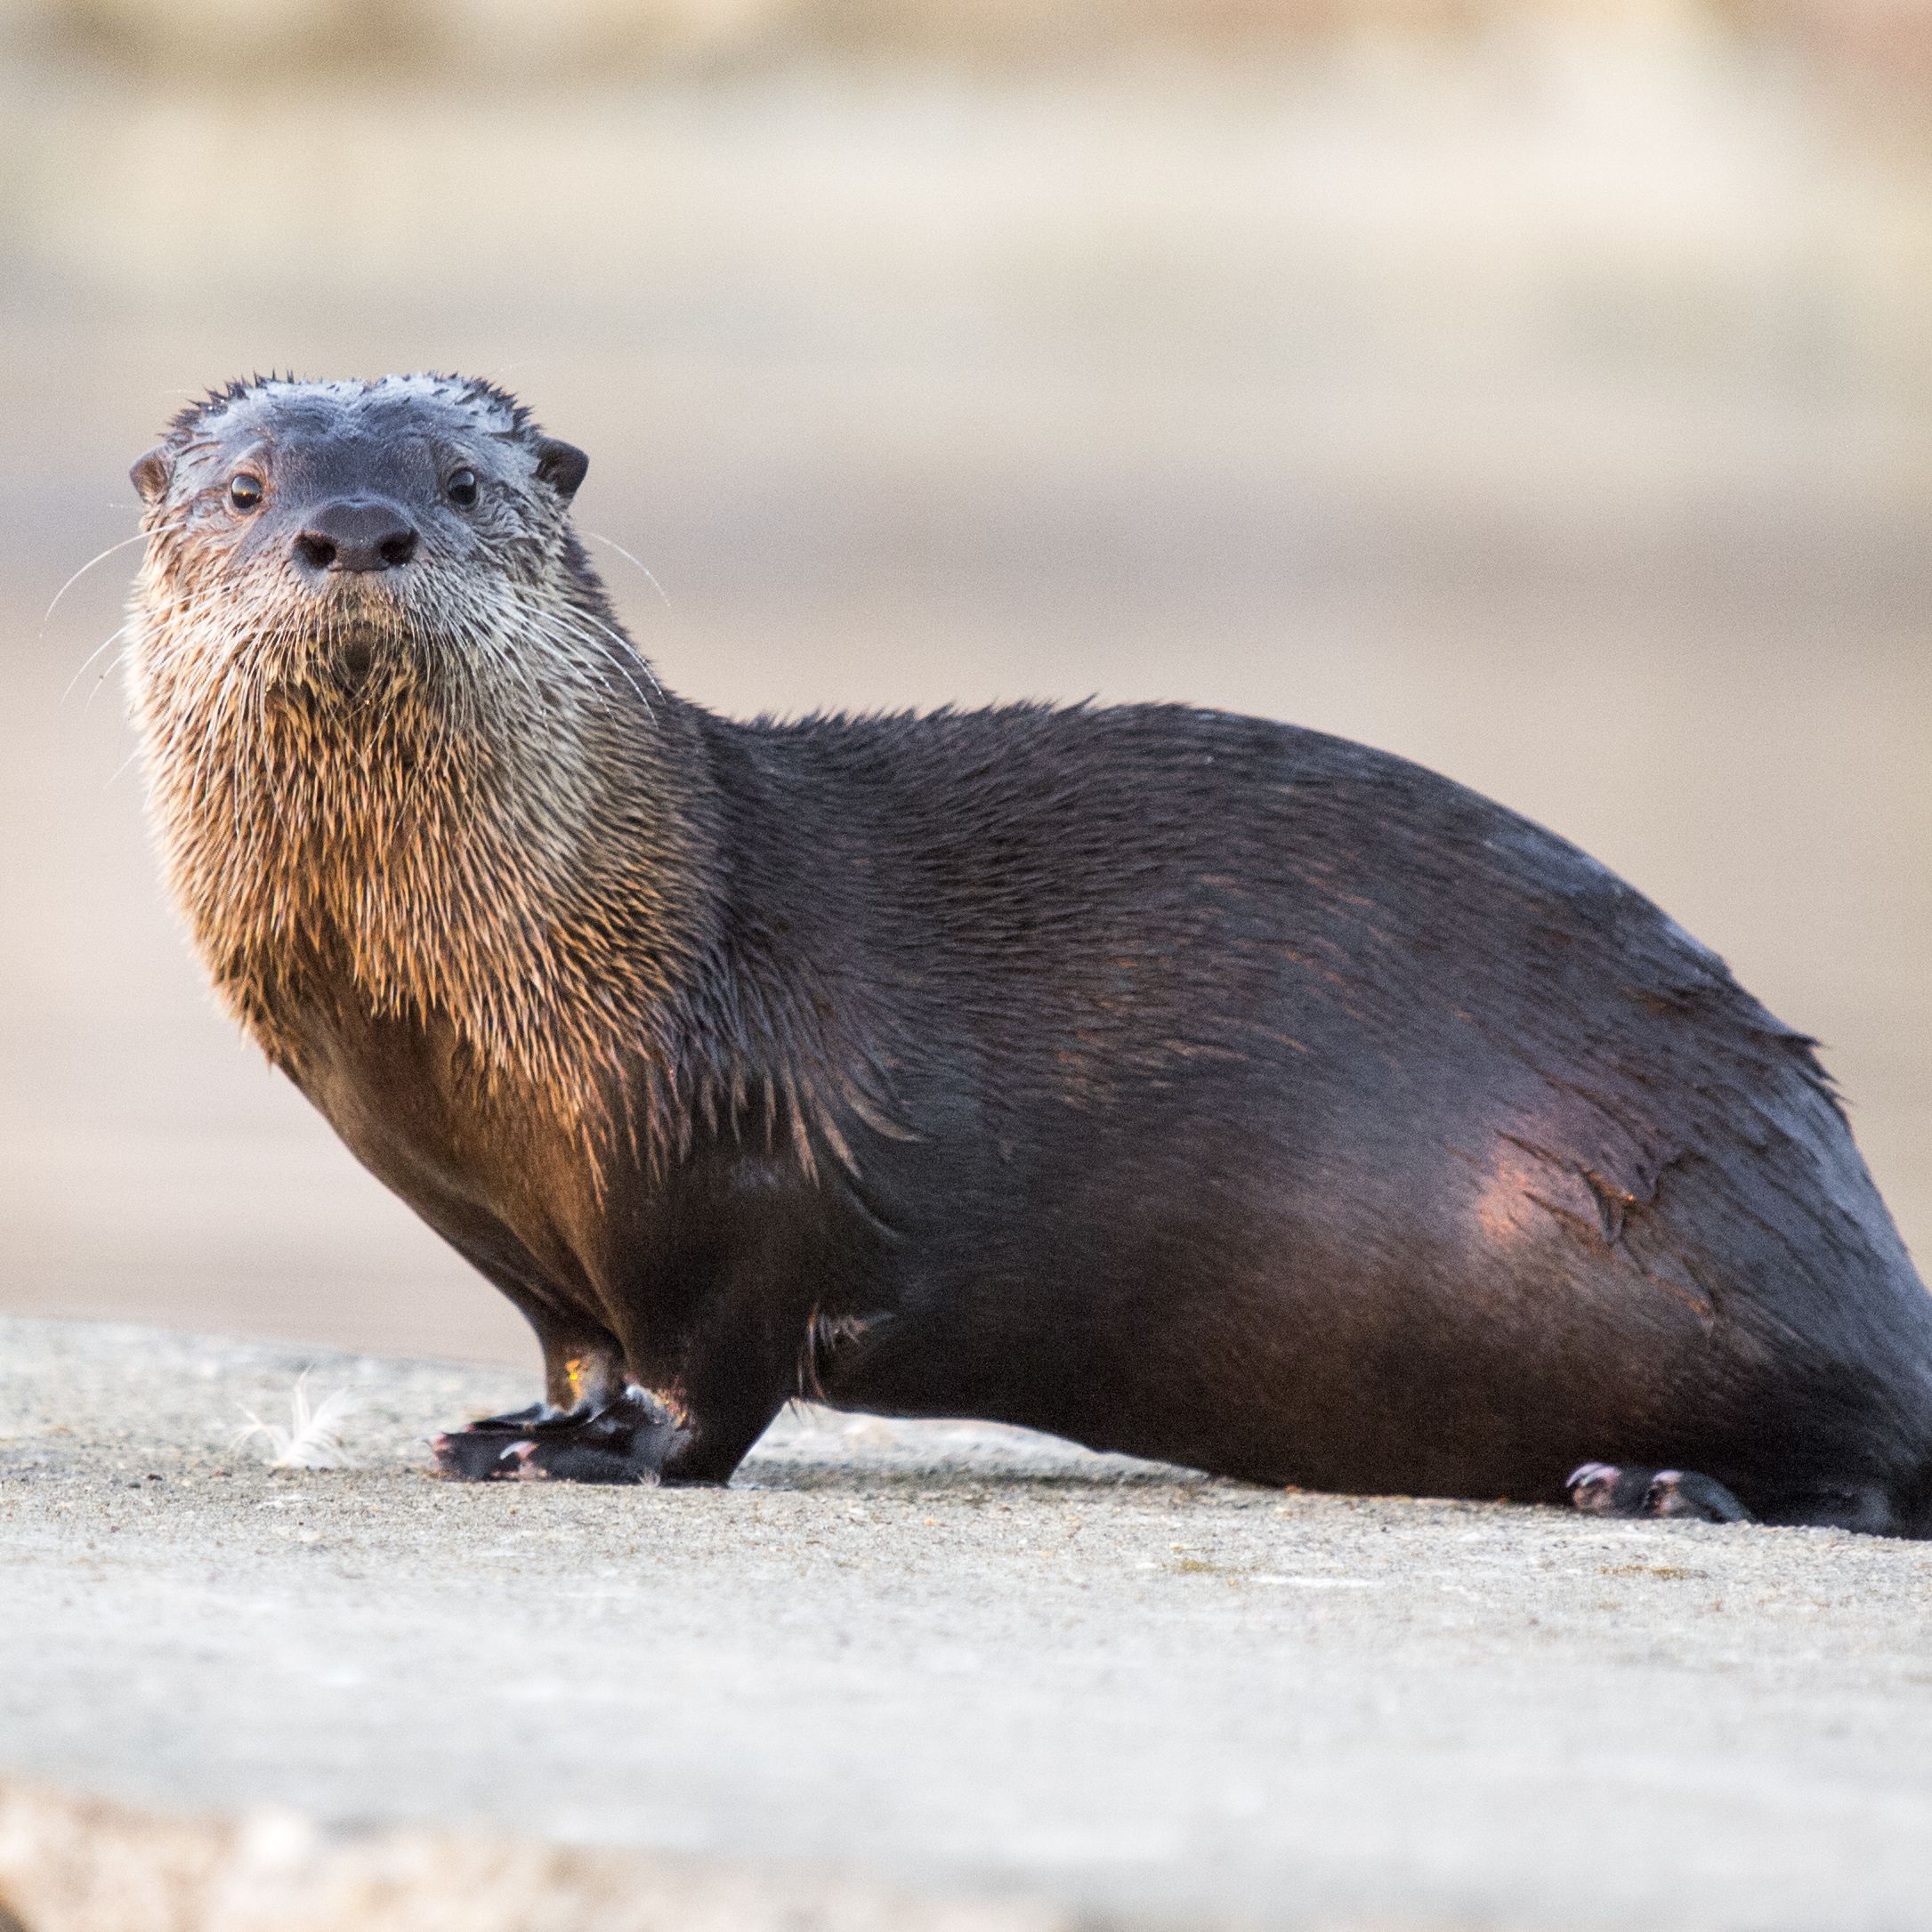 What is the scientific name for a river otter?